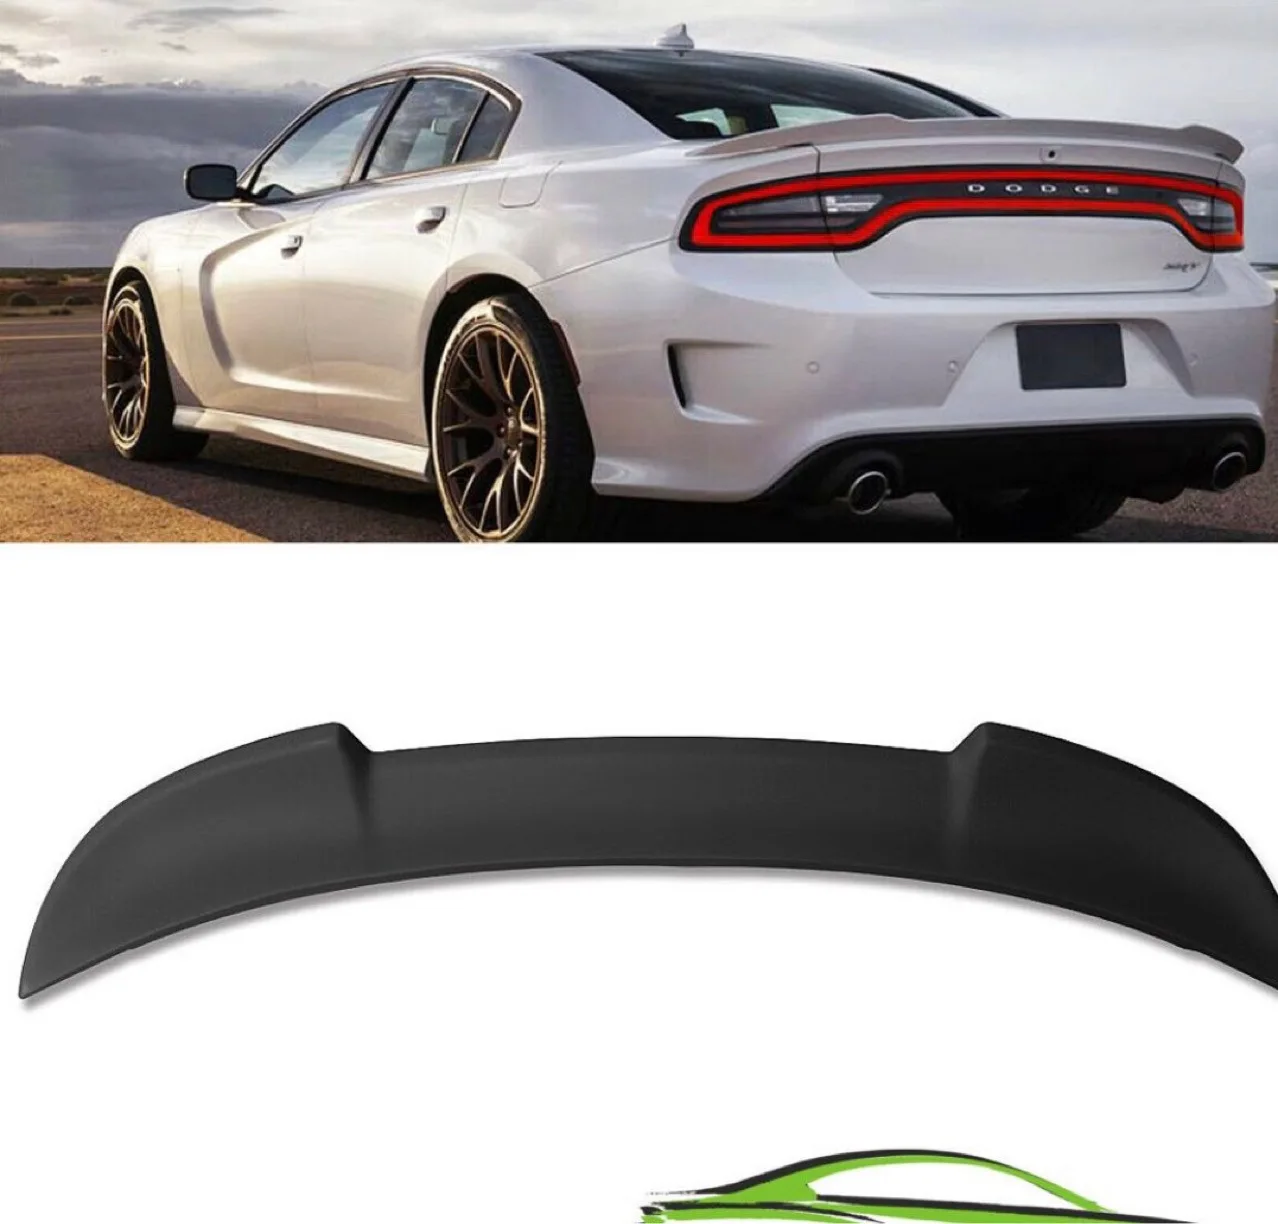 New Carbon Fiber Look /black Car Rear Roof Spoiler Wing Trunk Spoiler Wing  Lip For Dodge Charger Srt Sxt R/t Pursuit 2015-2019 - Buy Wing Product on  